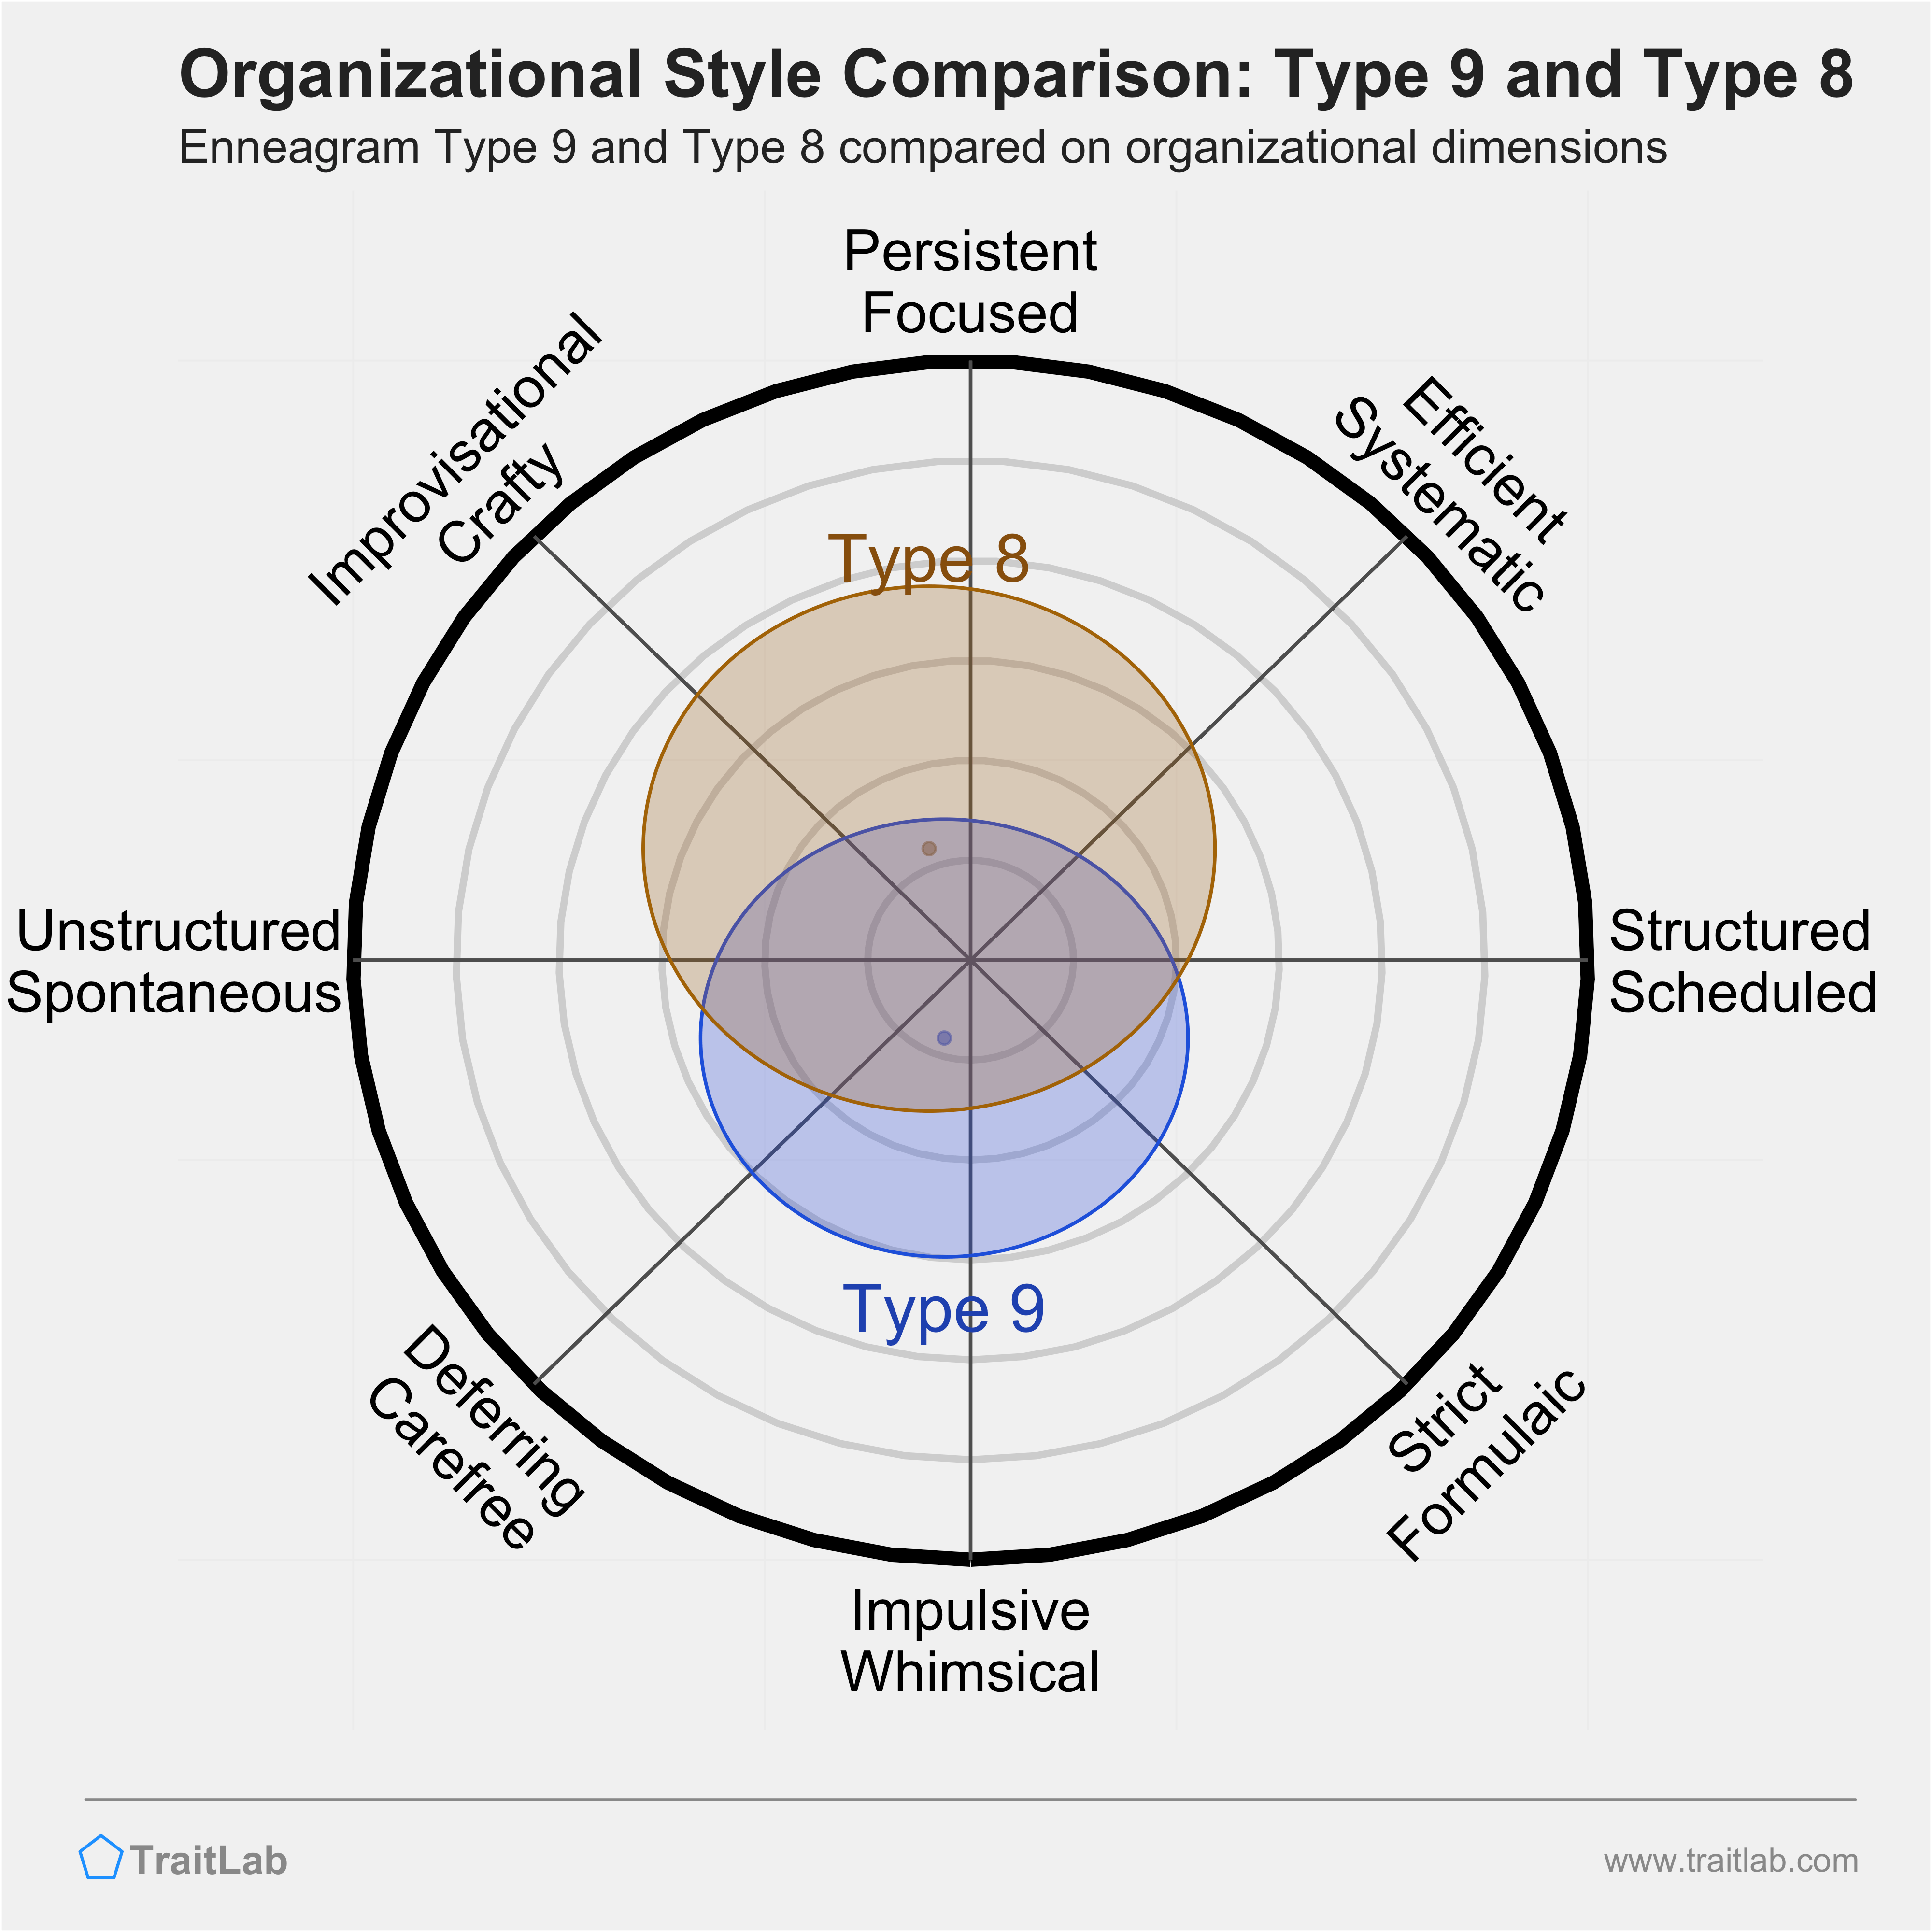 Type 9 and Type 8 comparison across organizational dimensions